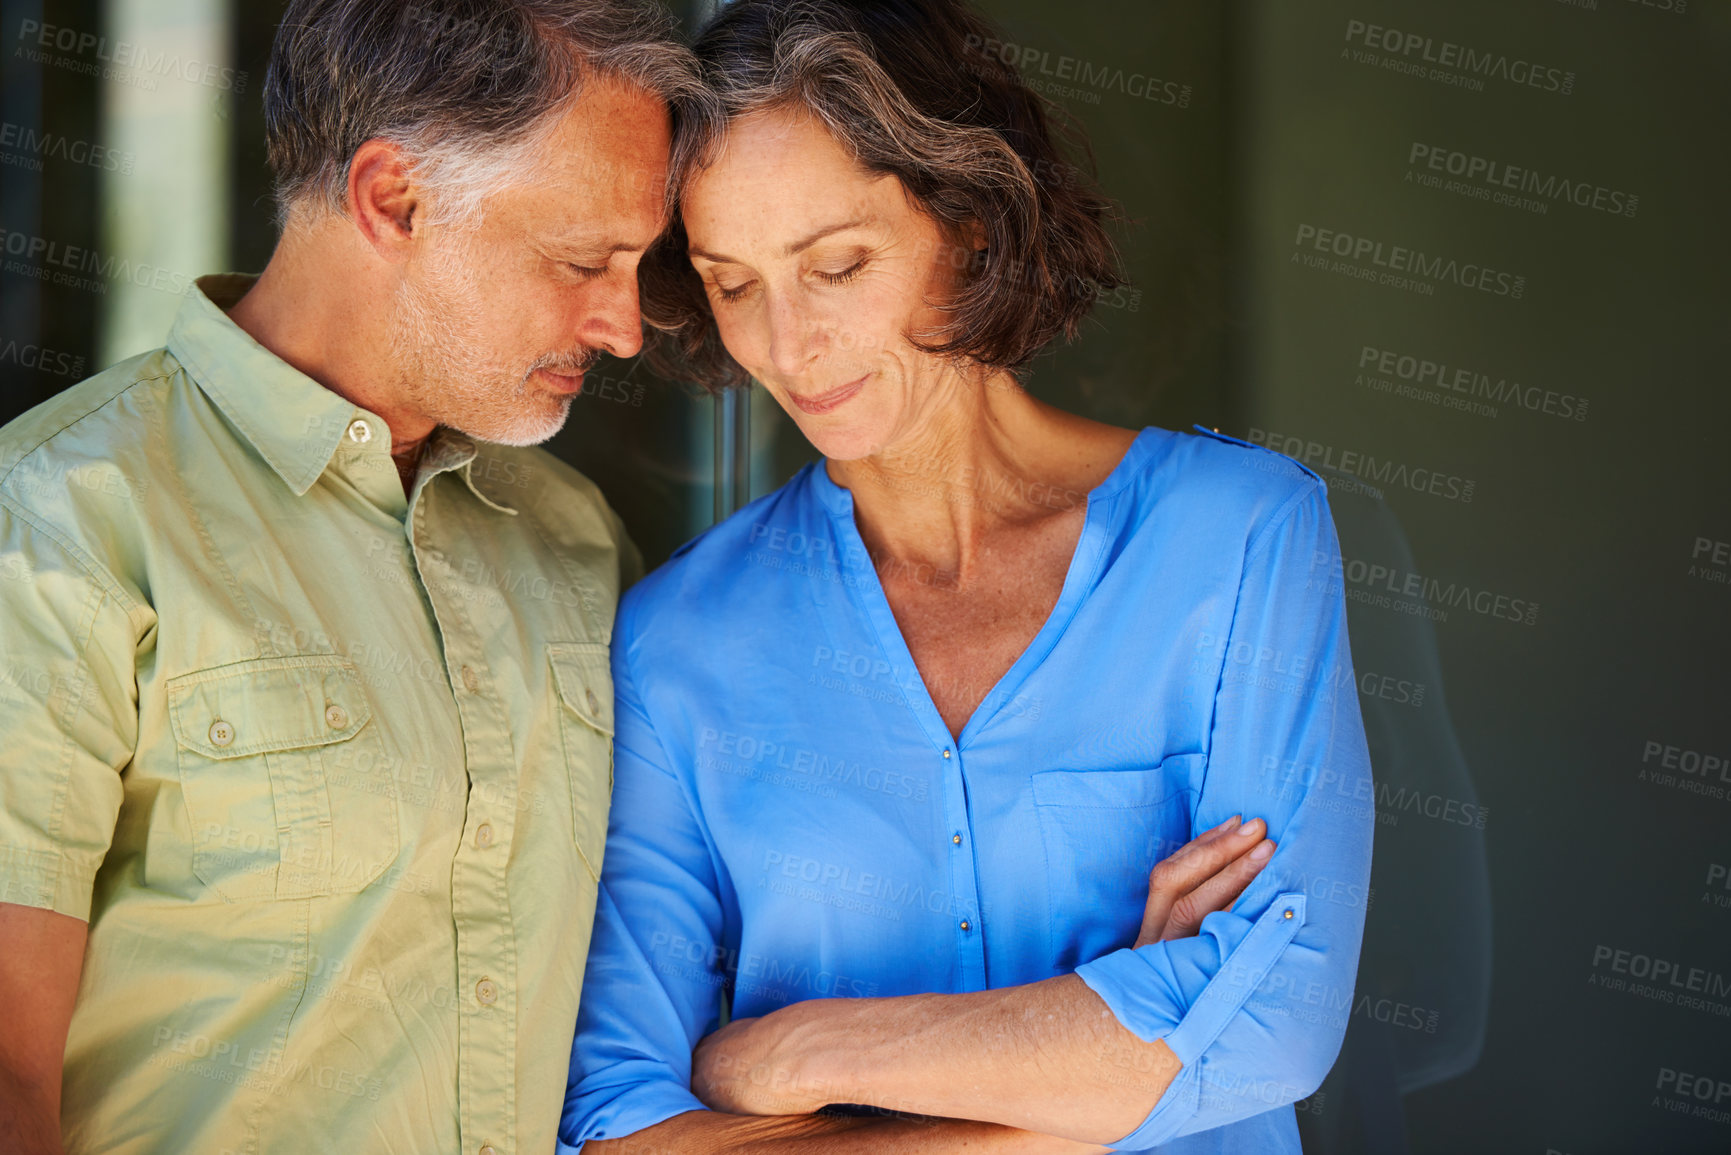 Buy stock photo Shot of a mature couple leaning in toward eachother